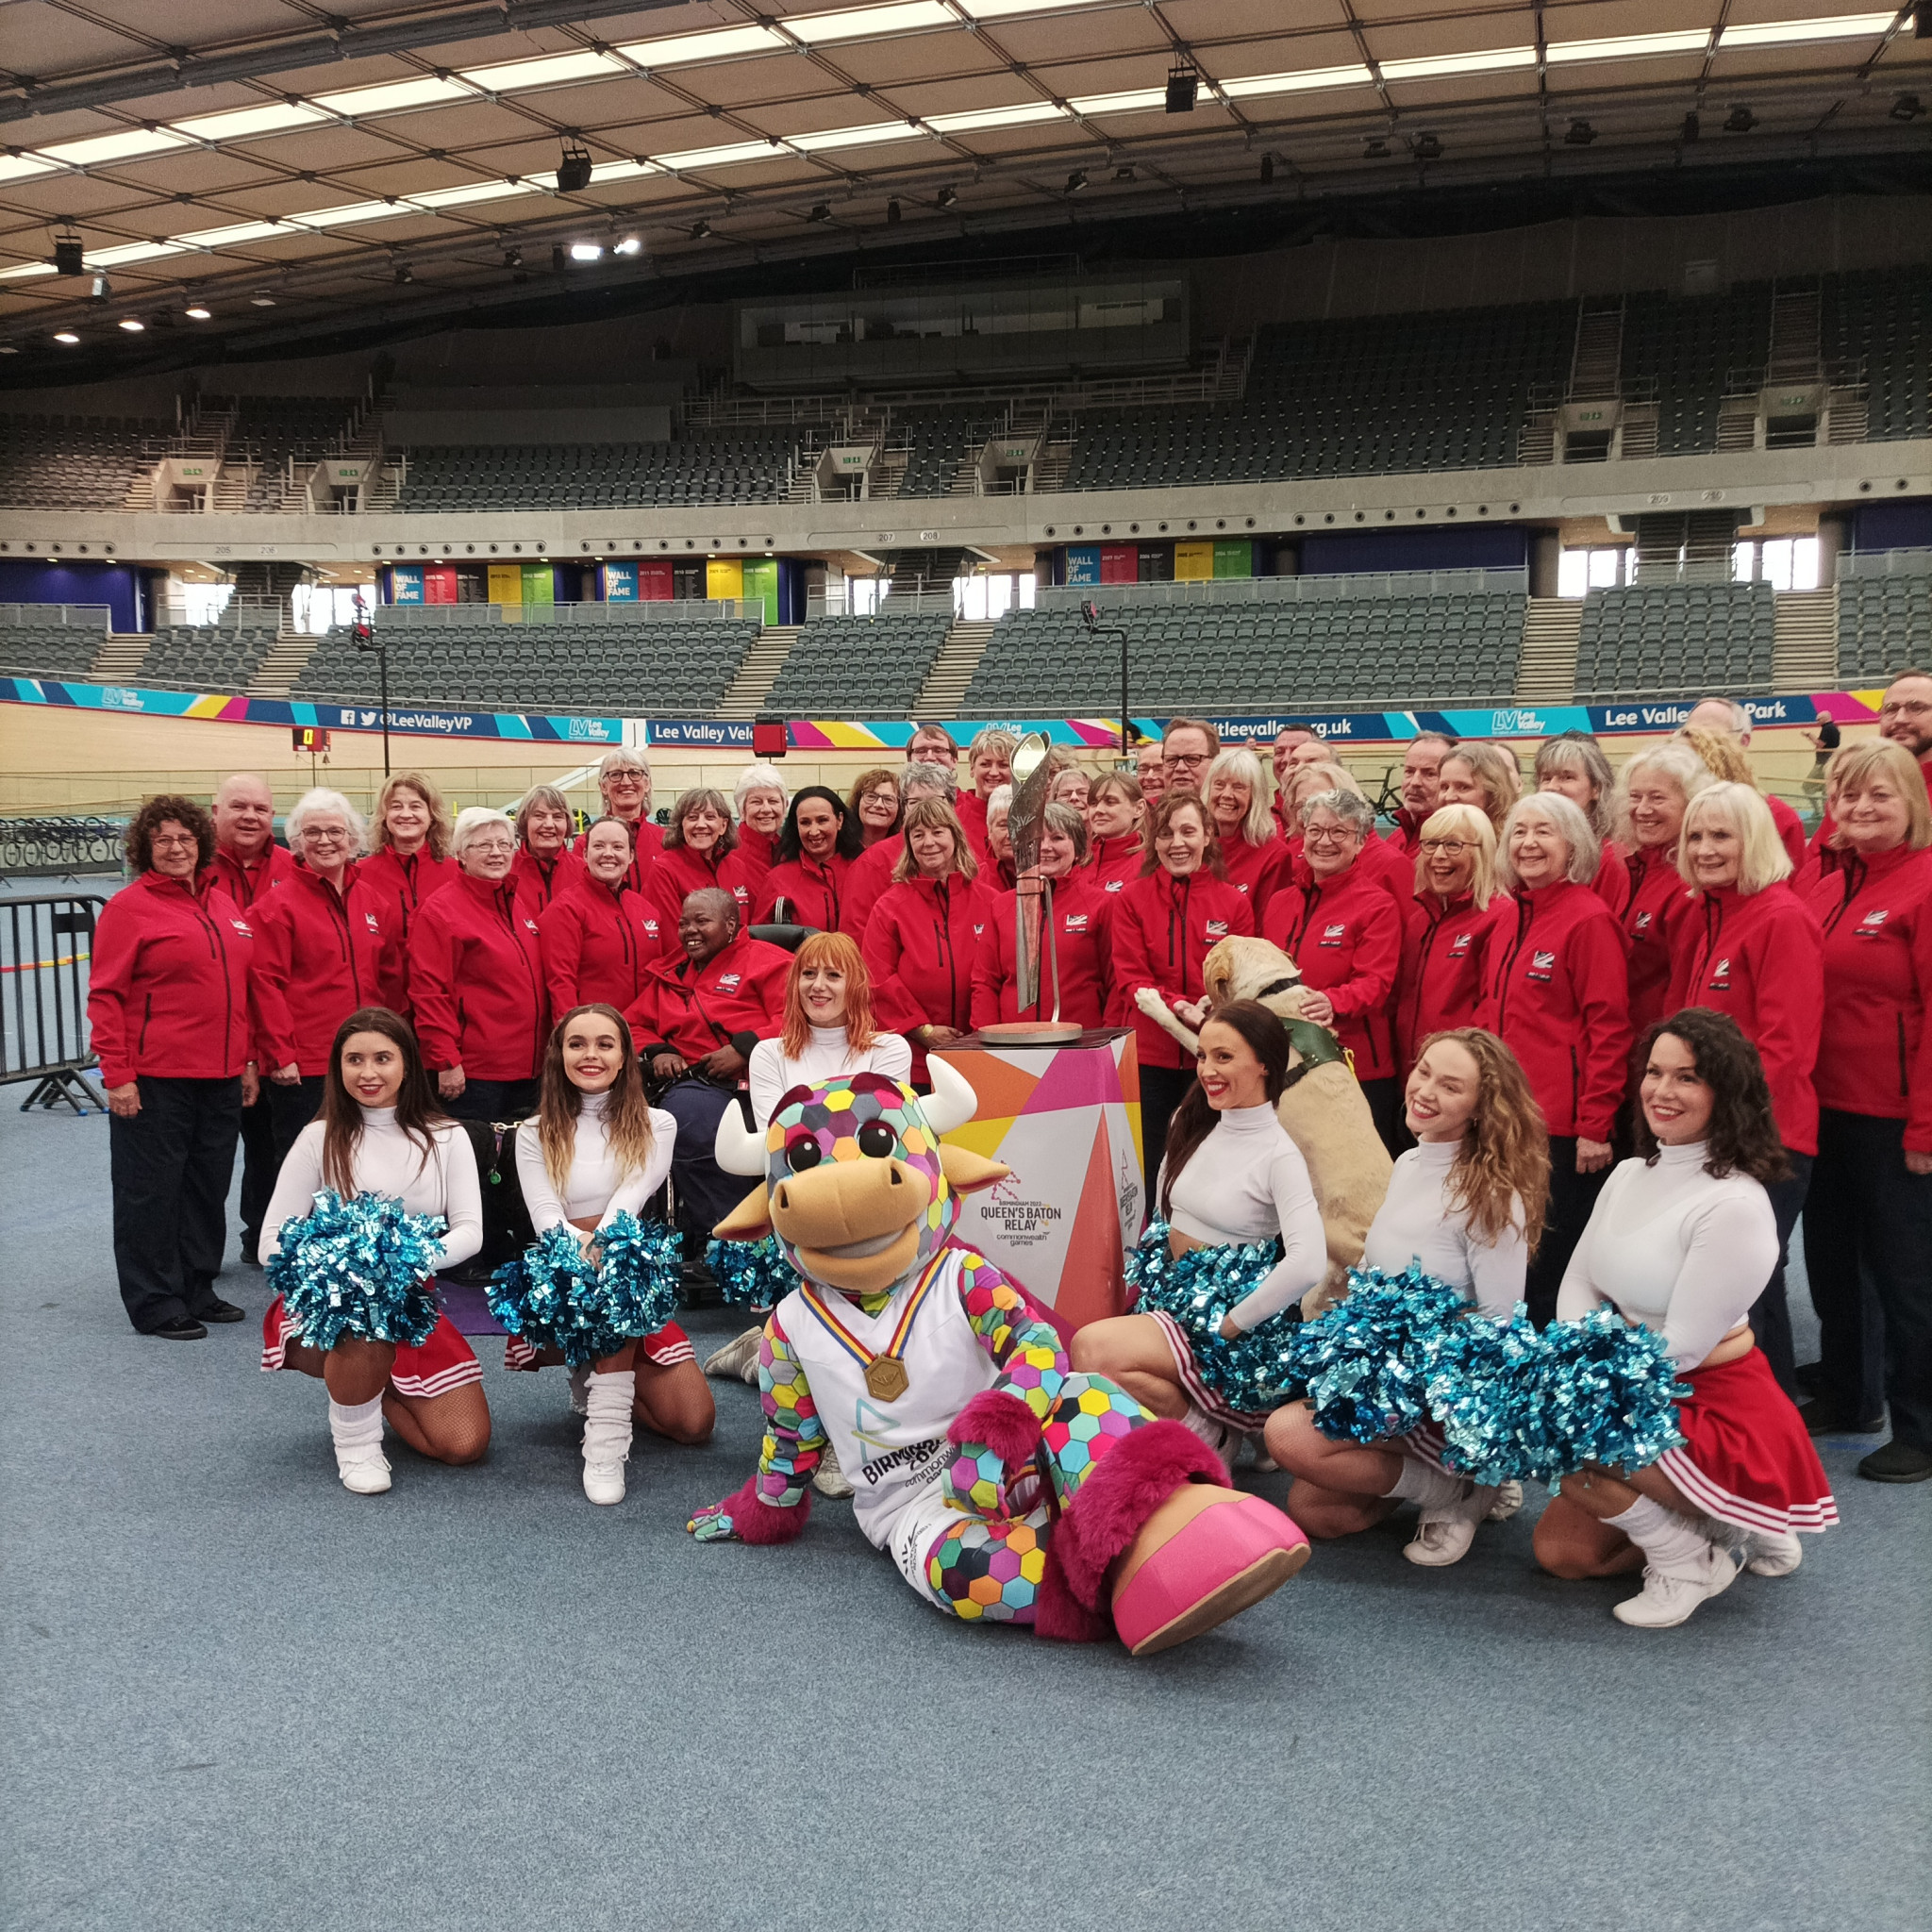 Birmingham 2022's mascot Perry joined the Games maker choir at the velodrome, formed from volunteers at the 2012 Olympics and a cheerleader troupe to serenade a group of cyclists riding with the Baton ©ITG